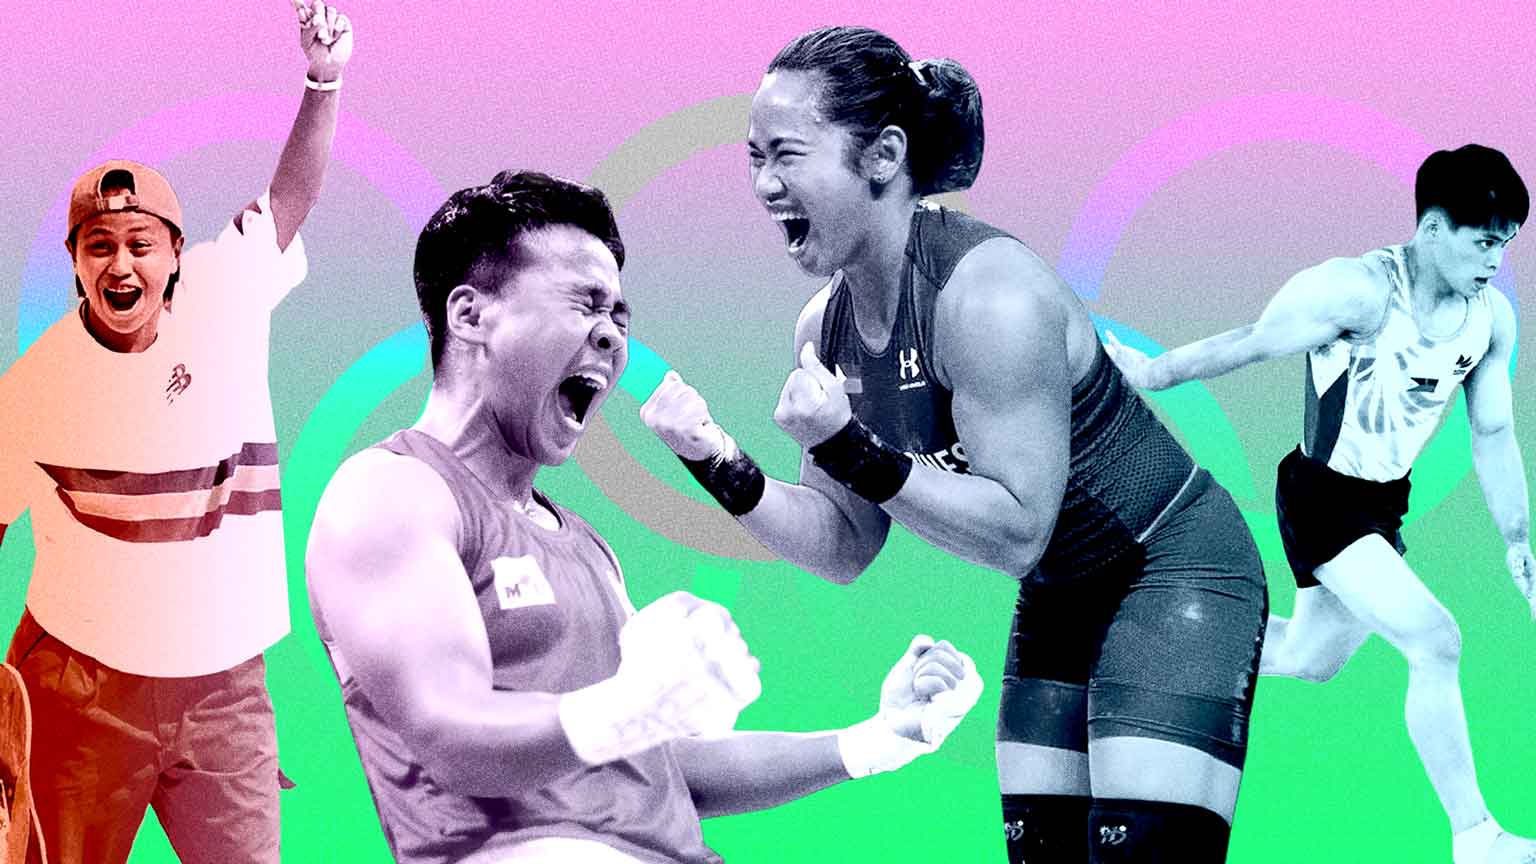 THE MANY WAYS IN WHICH TEAM PHILIPPINES MADE HISTORY AND BROKE IMPORTANT BARRIERS AT THE 2020 TOKYO OLYMPICS